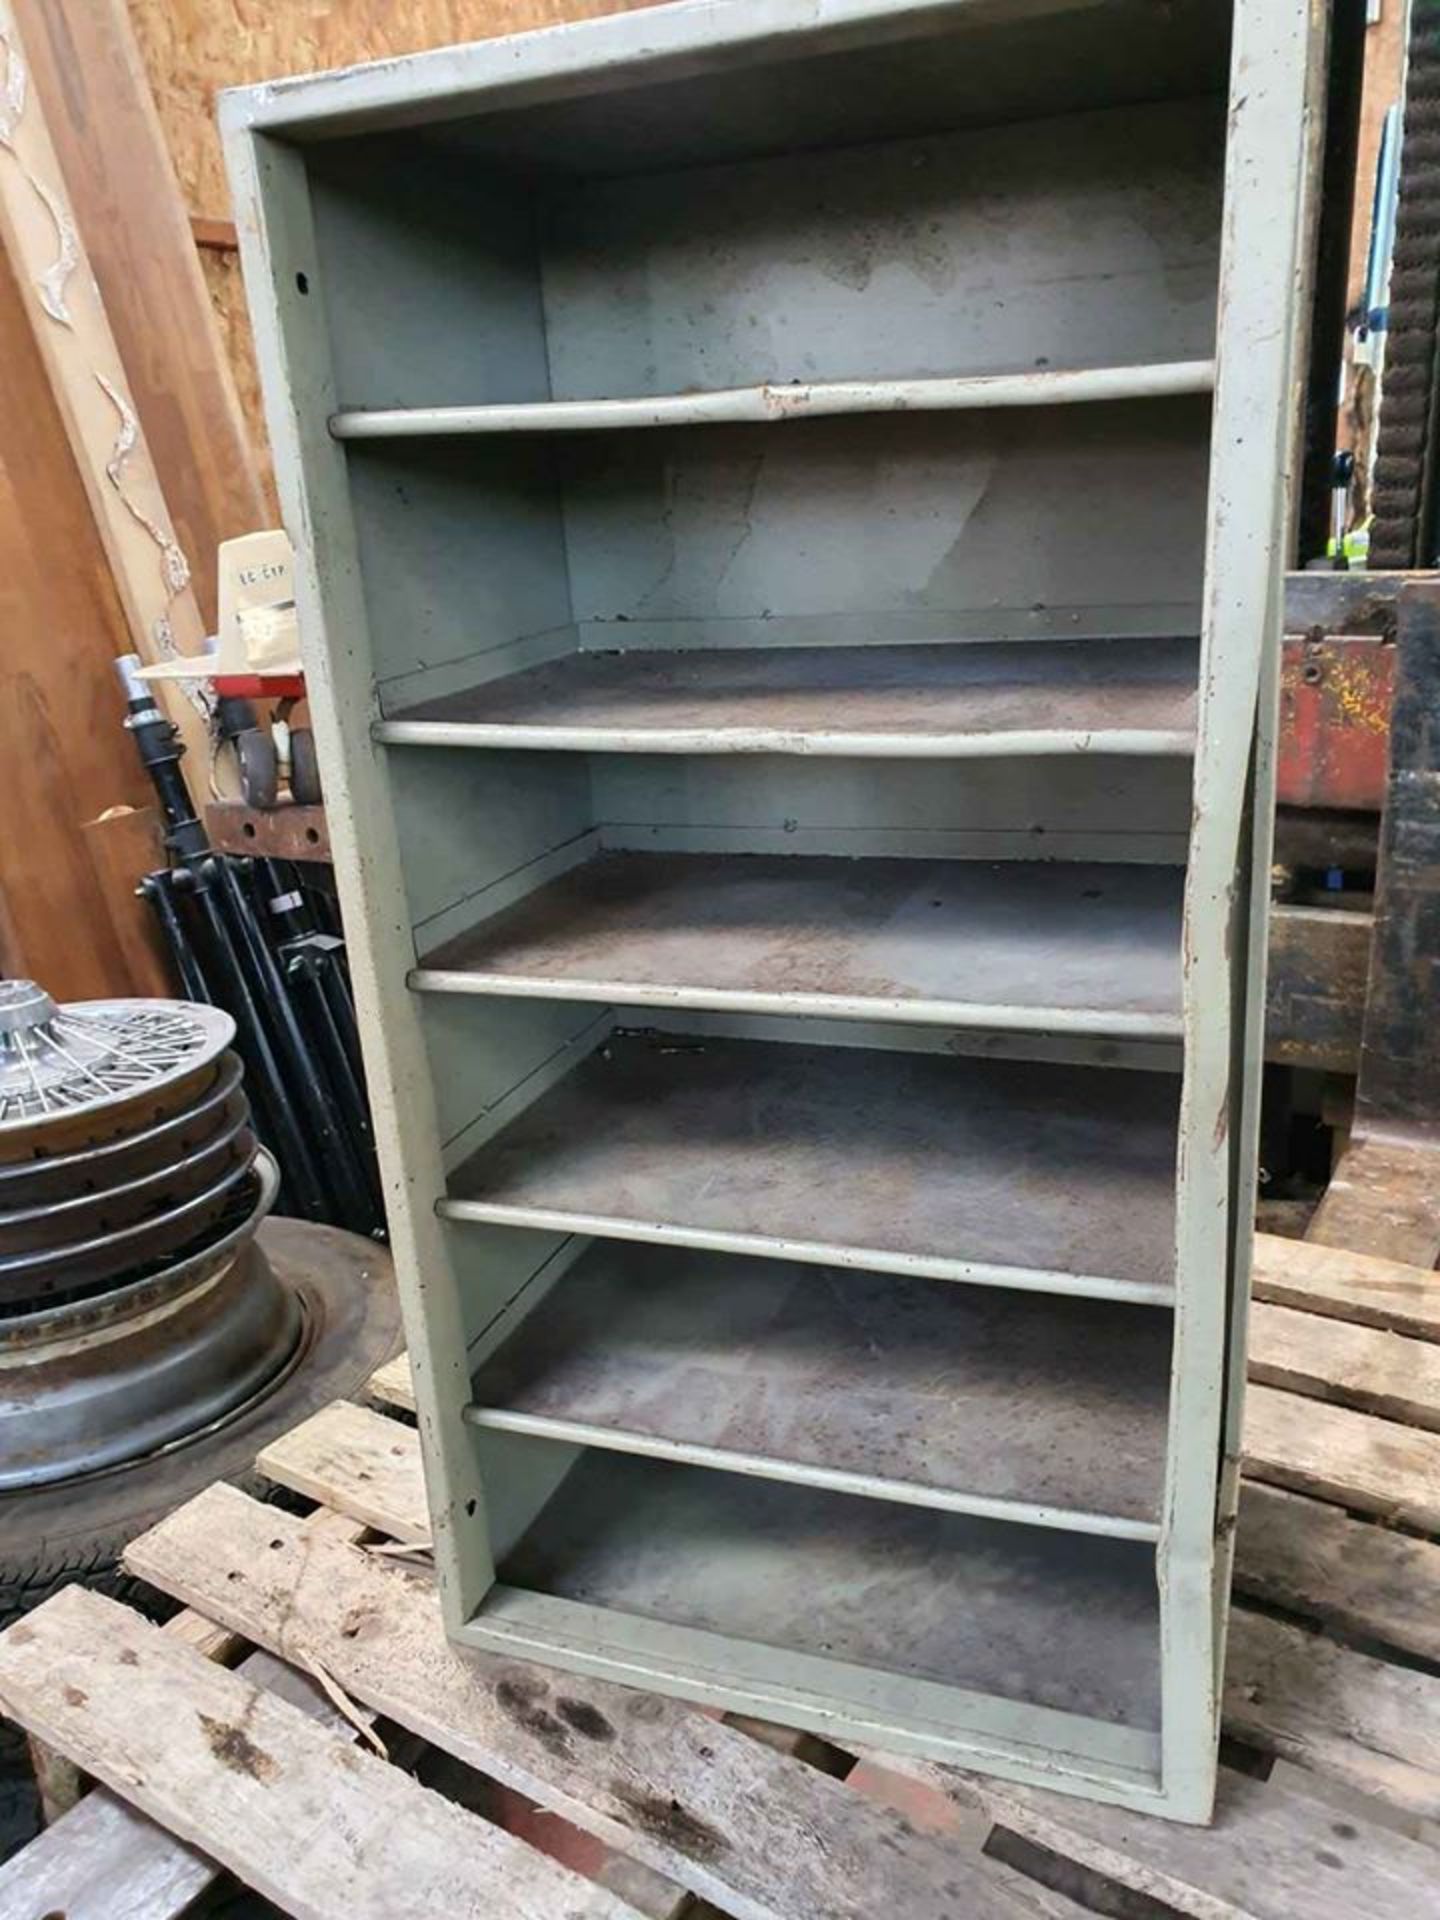 METAL SHELVING UNIT OUT OF A METAL WORKSHOP